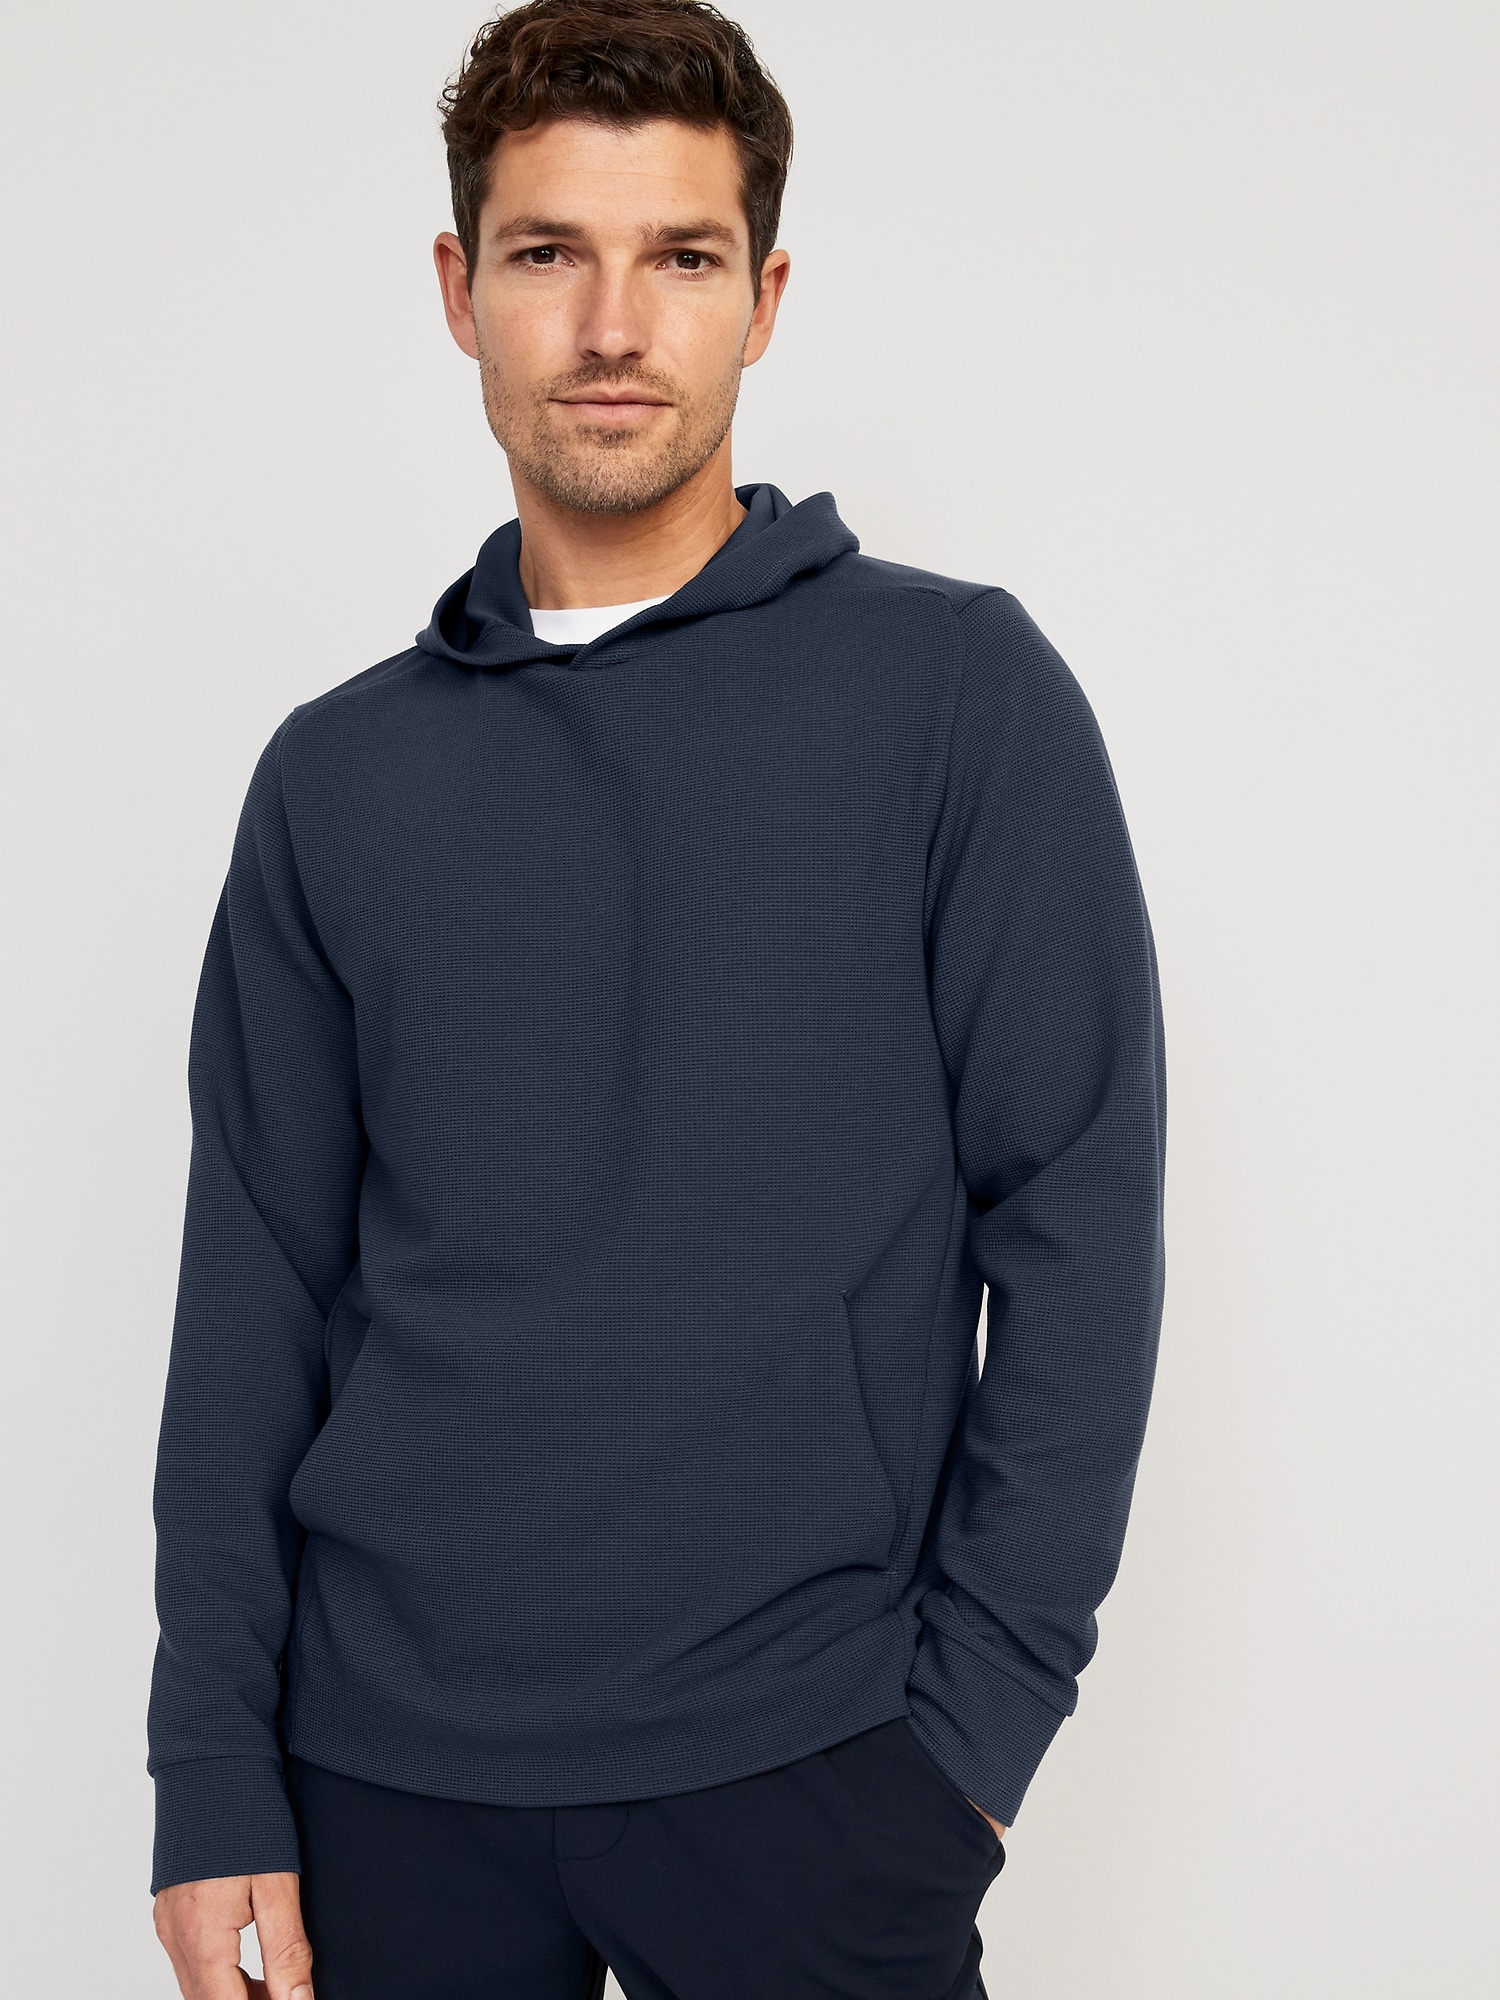 Beyond Thermal-Knit Pullover Hoodie for Men